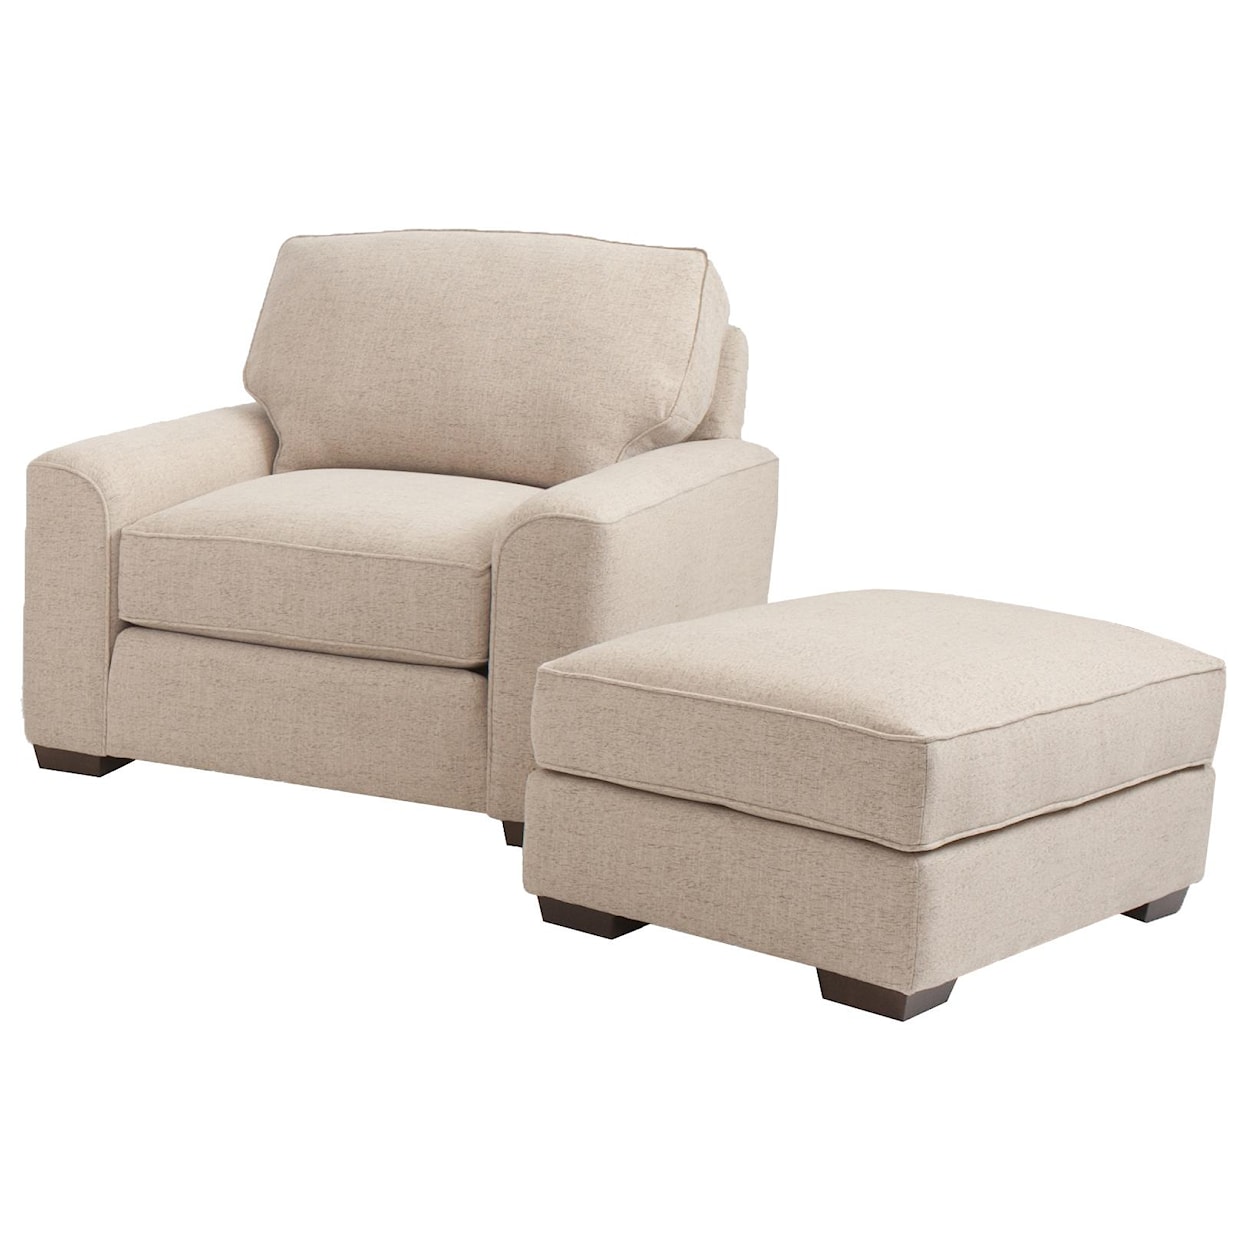 Smith Brothers Build Your Own 8000 Series Ottoman